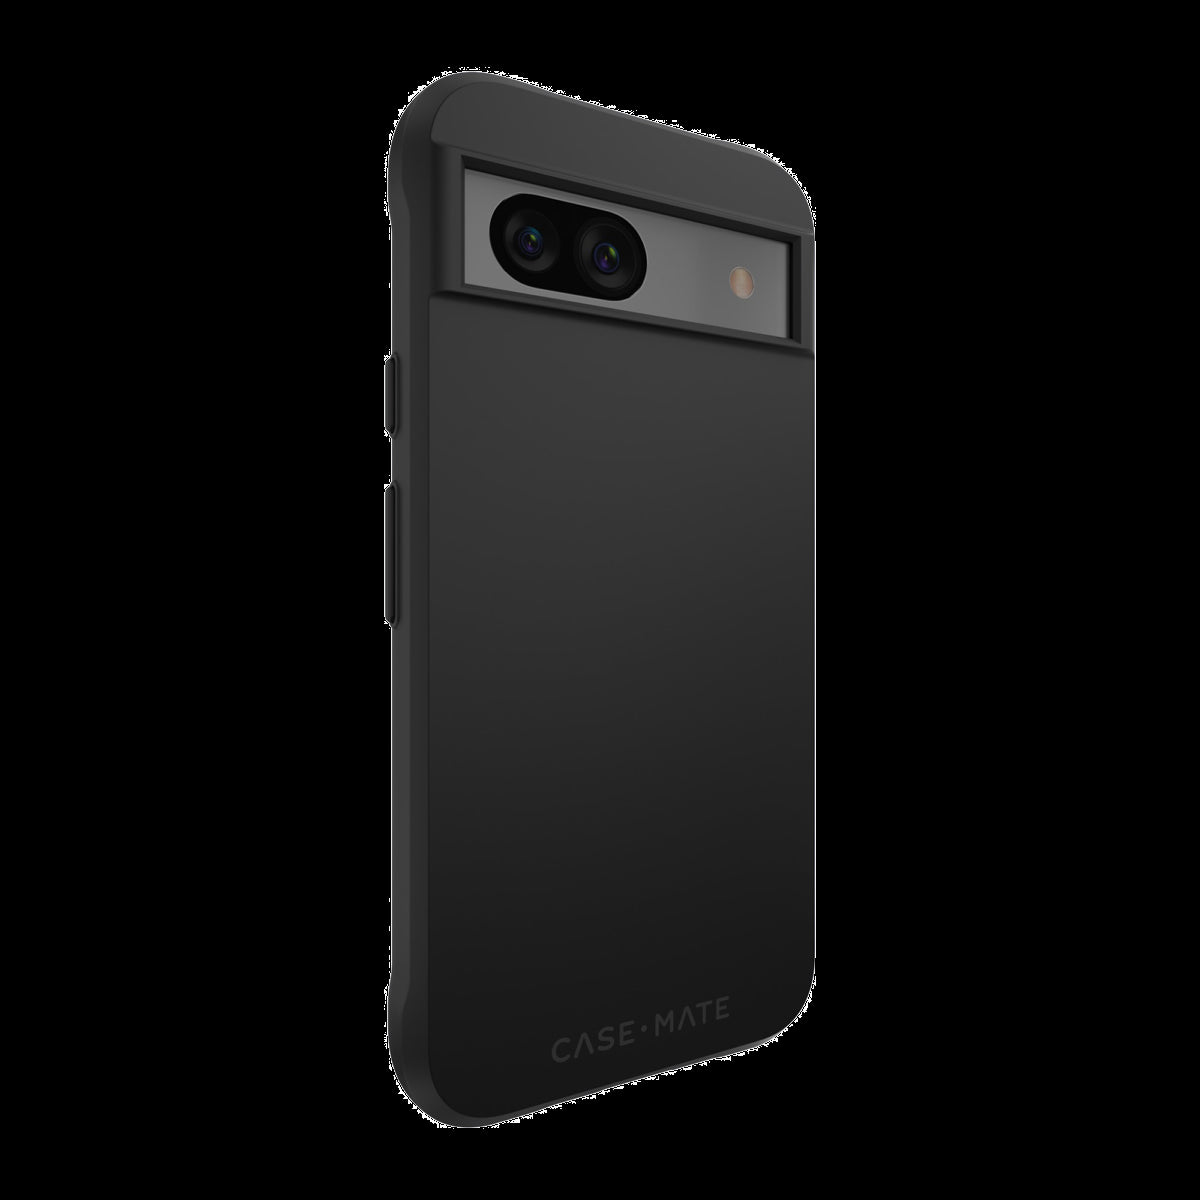 <p>The Case-Mate Tough Black features 12-foot drop protection and a one-piece minimalistic design that will fit every occasion.</p>